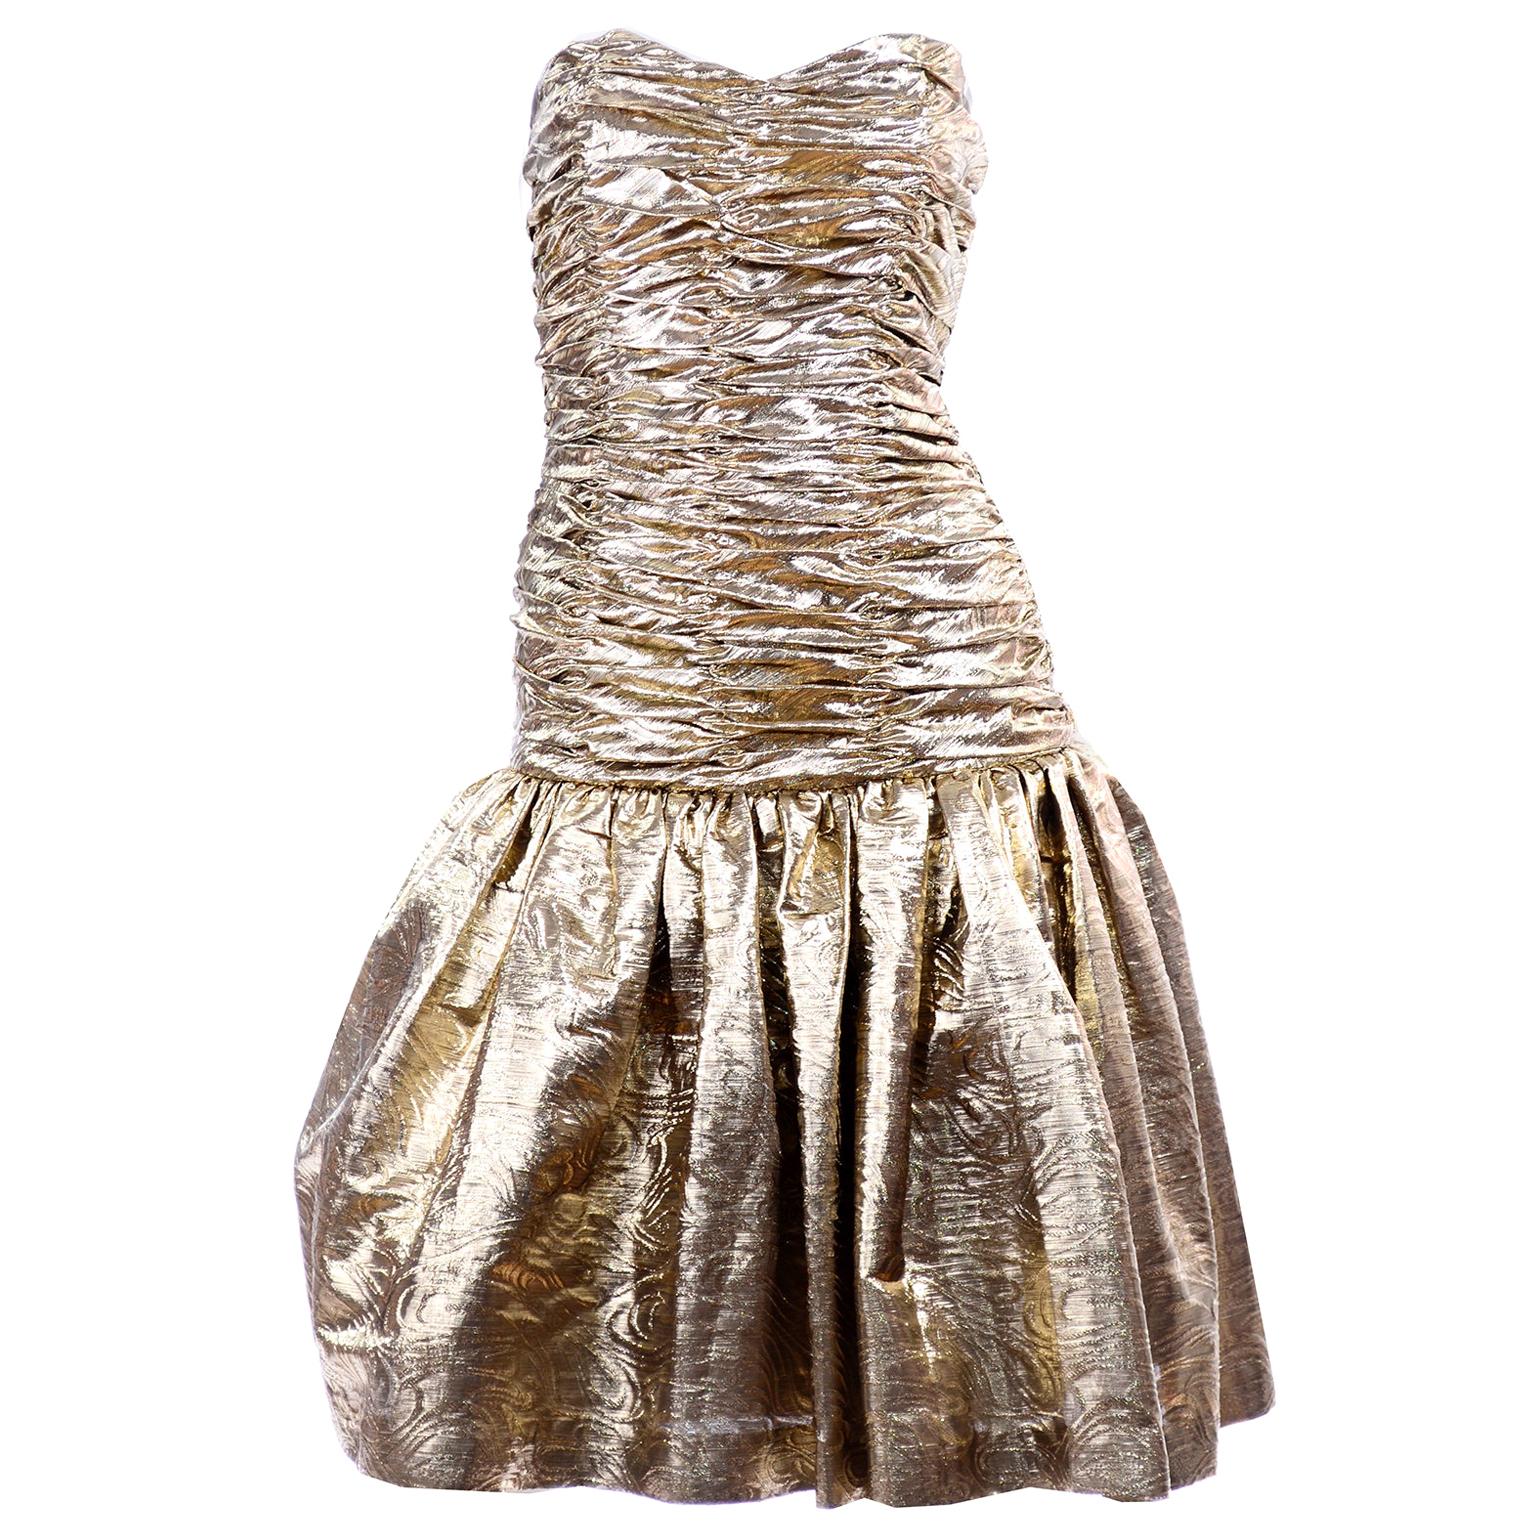 1980s Textured Gold Strapless Vintage Dress W Tulle underskirt & Ruched Bodice For Sale